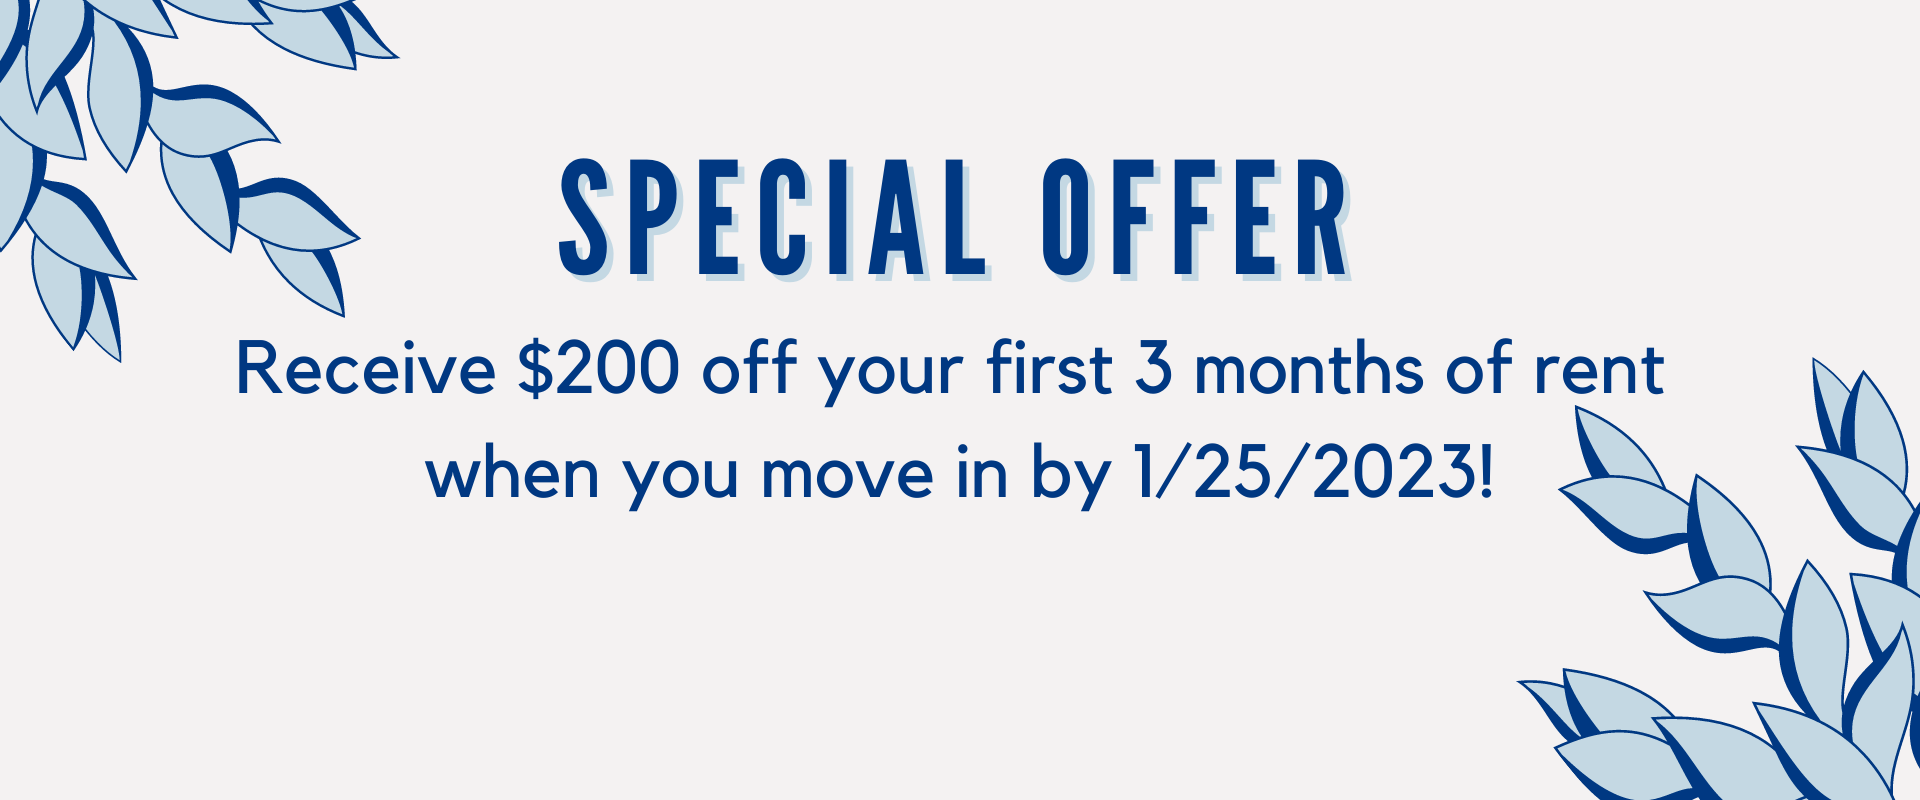 !!!! Spooky Specials !!!!

 

*Special on 3/2 townhomes

Move in before October 20th and only pay $599 for the remainder of the month. Includes two in house Applications, admin fee and prorated amount for October

 

*Specials on 2 bedroom and 1 bedroom

Move in the month of October 20th and only pay $499 for the remainder of the month. Includes two in house Applications , admin fee and prorated amount for October

 

Call us for details  659-599-7001 or email us

Qbyrd@smpmgt.com

Jvance@smpmgt.com